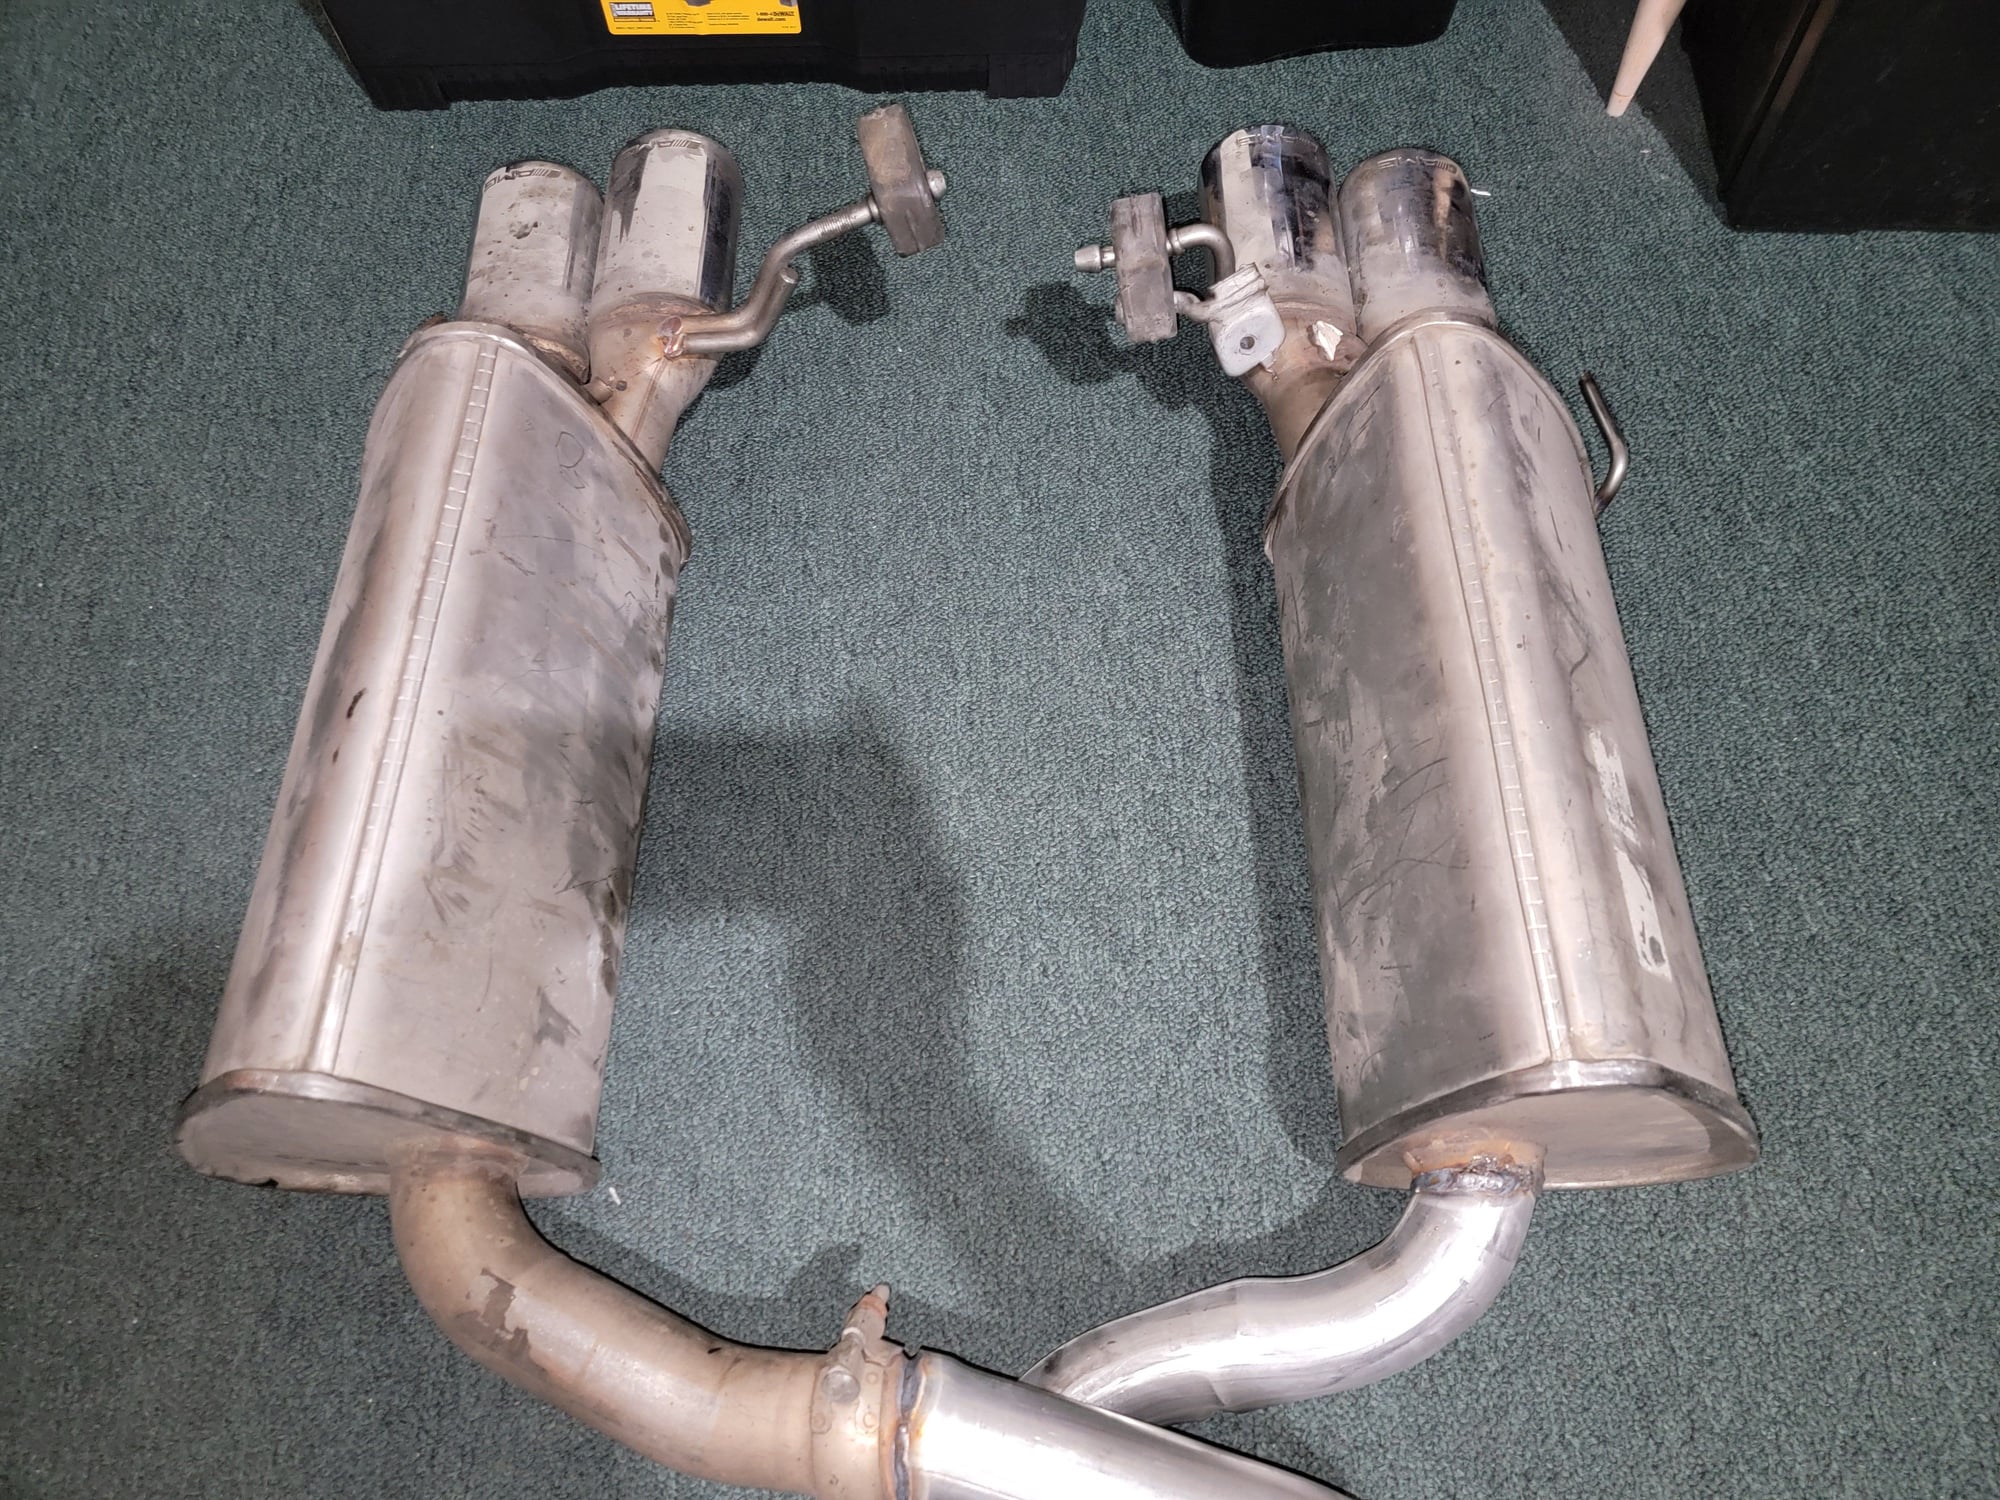 Engine - Exhaust - Mercedes Amg C55 Dual exhaust with Mufflers, Heat Shield and Spare Tire Tub - Used - 2001 to 2007 Mercedes-Benz C-Class - Los Angeles, CA 90064, United States